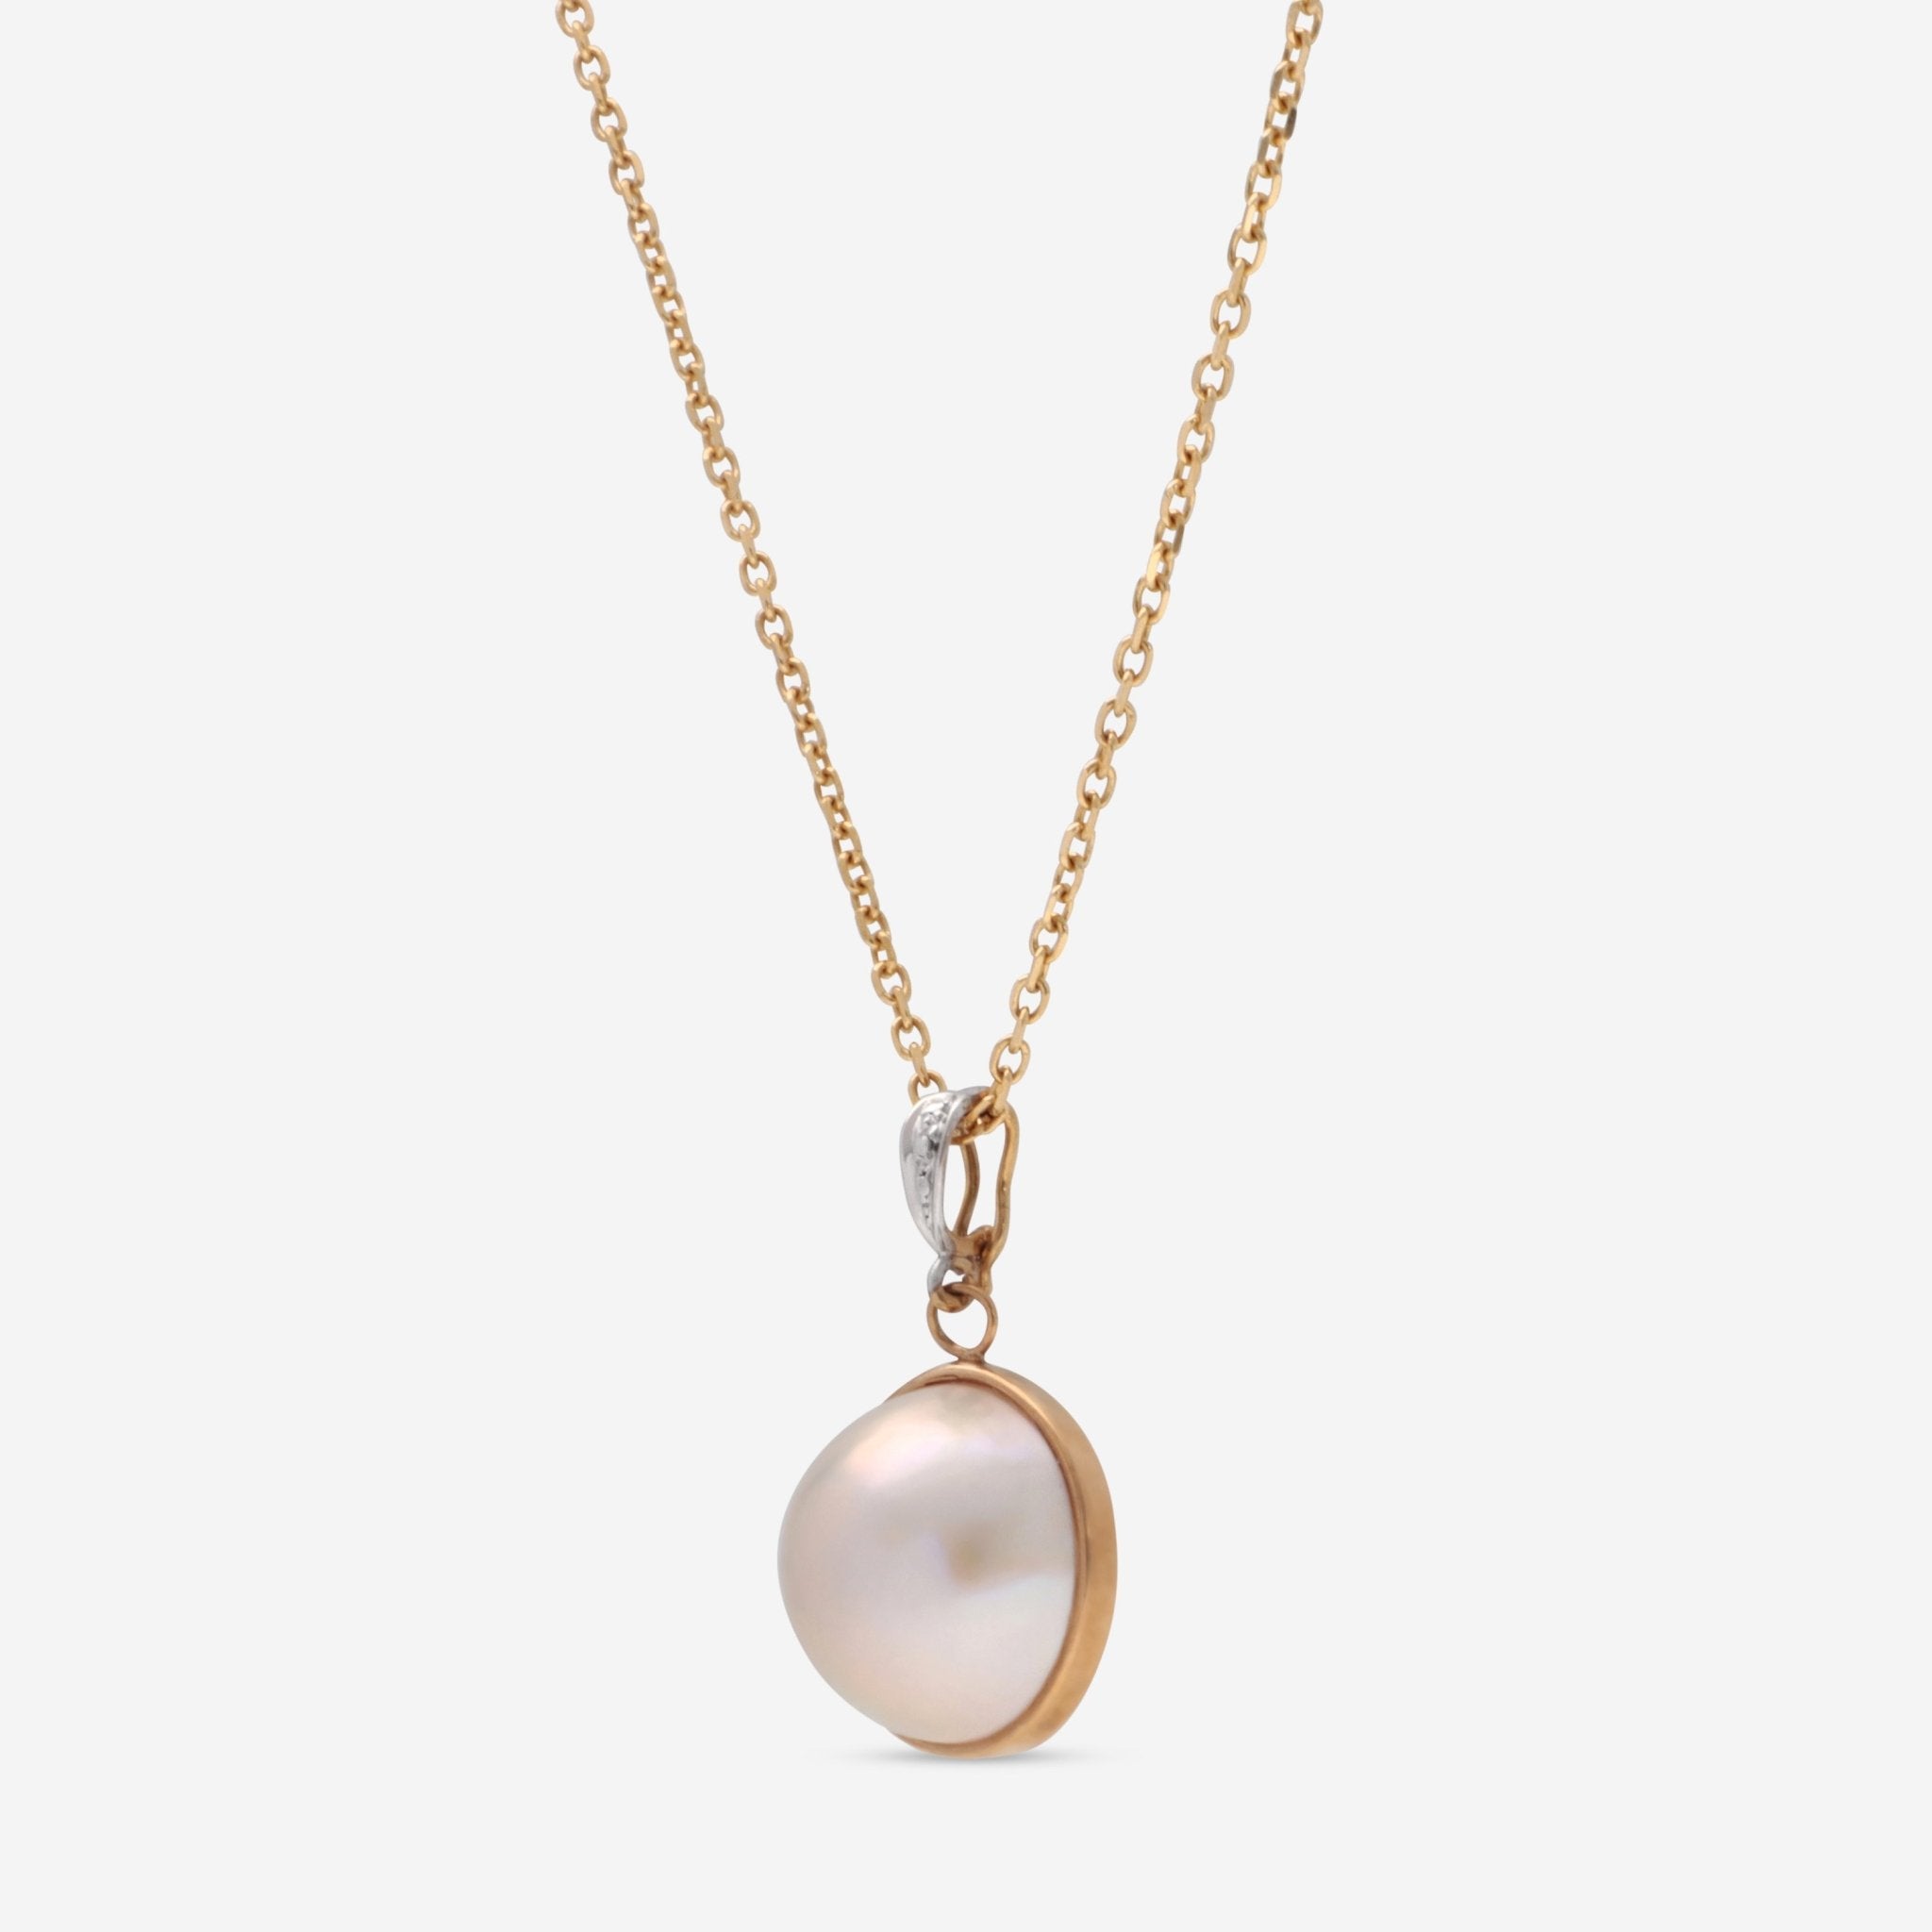 London Pearl 18K Yellow Gold Mabe 17mm Pearl Pendant P1113MO - THE SOLIST - London Pearl